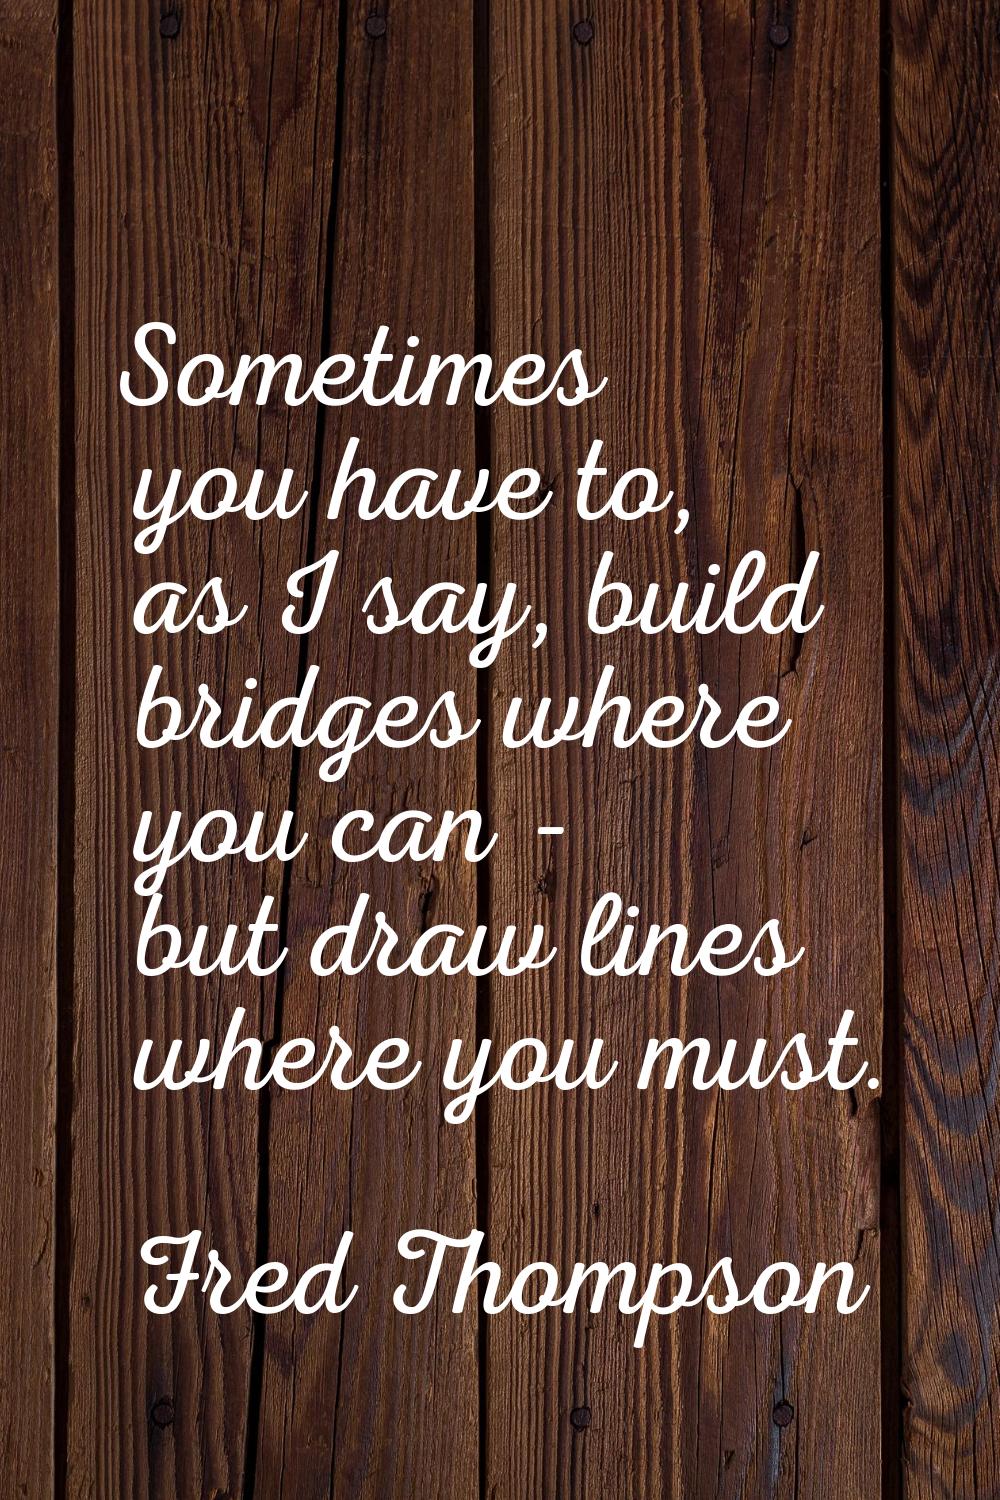 Sometimes you have to, as I say, build bridges where you can - but draw lines where you must.